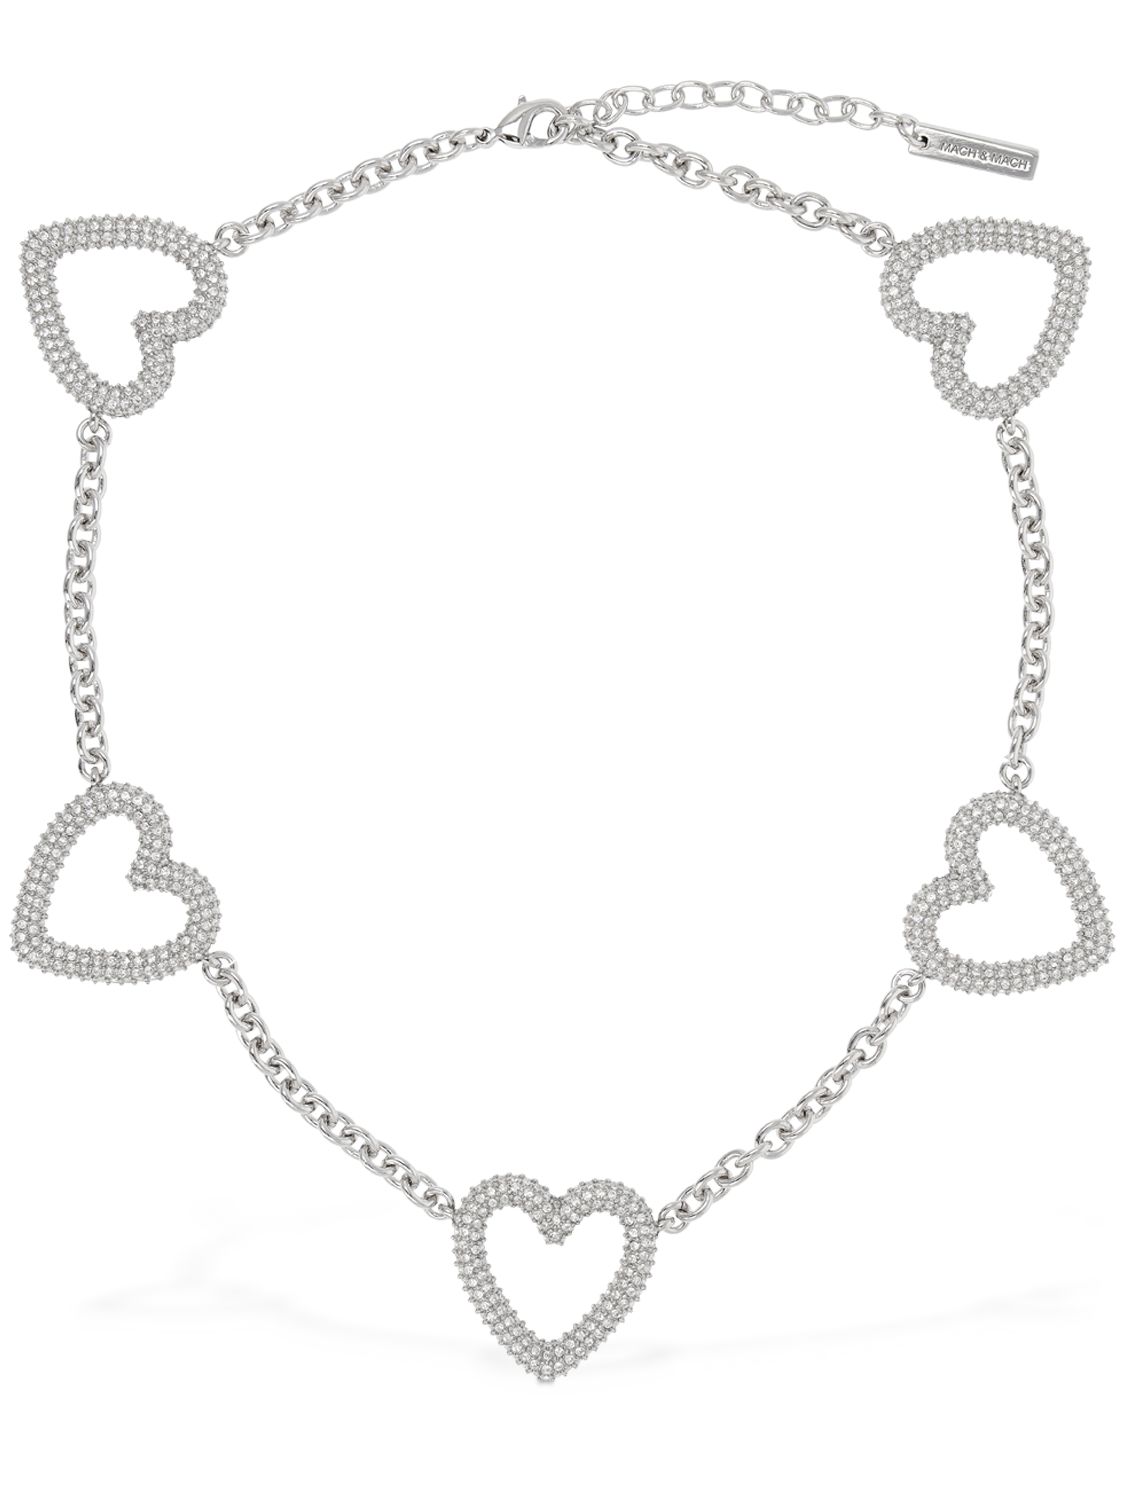 Multiple Crystal Heart Collar Necklace